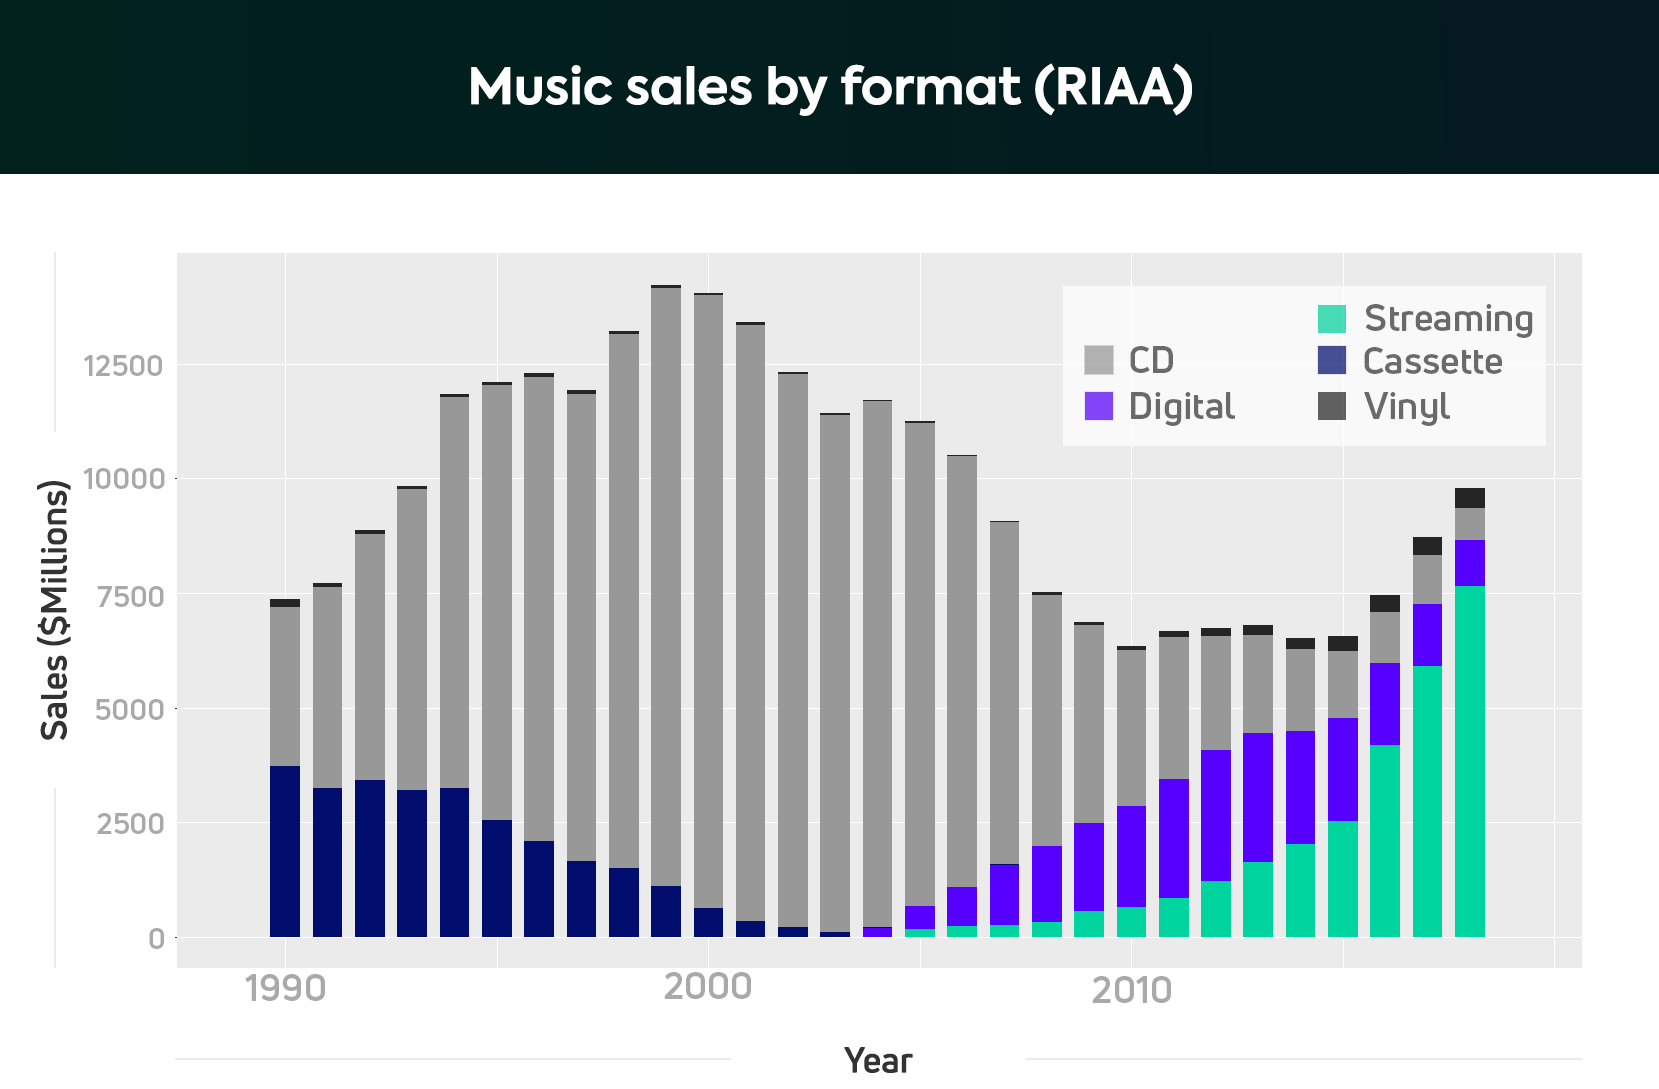 A chart showing music sales figures over time, showing that vinyl has grown over the years, while CD, digital sales have crashed.